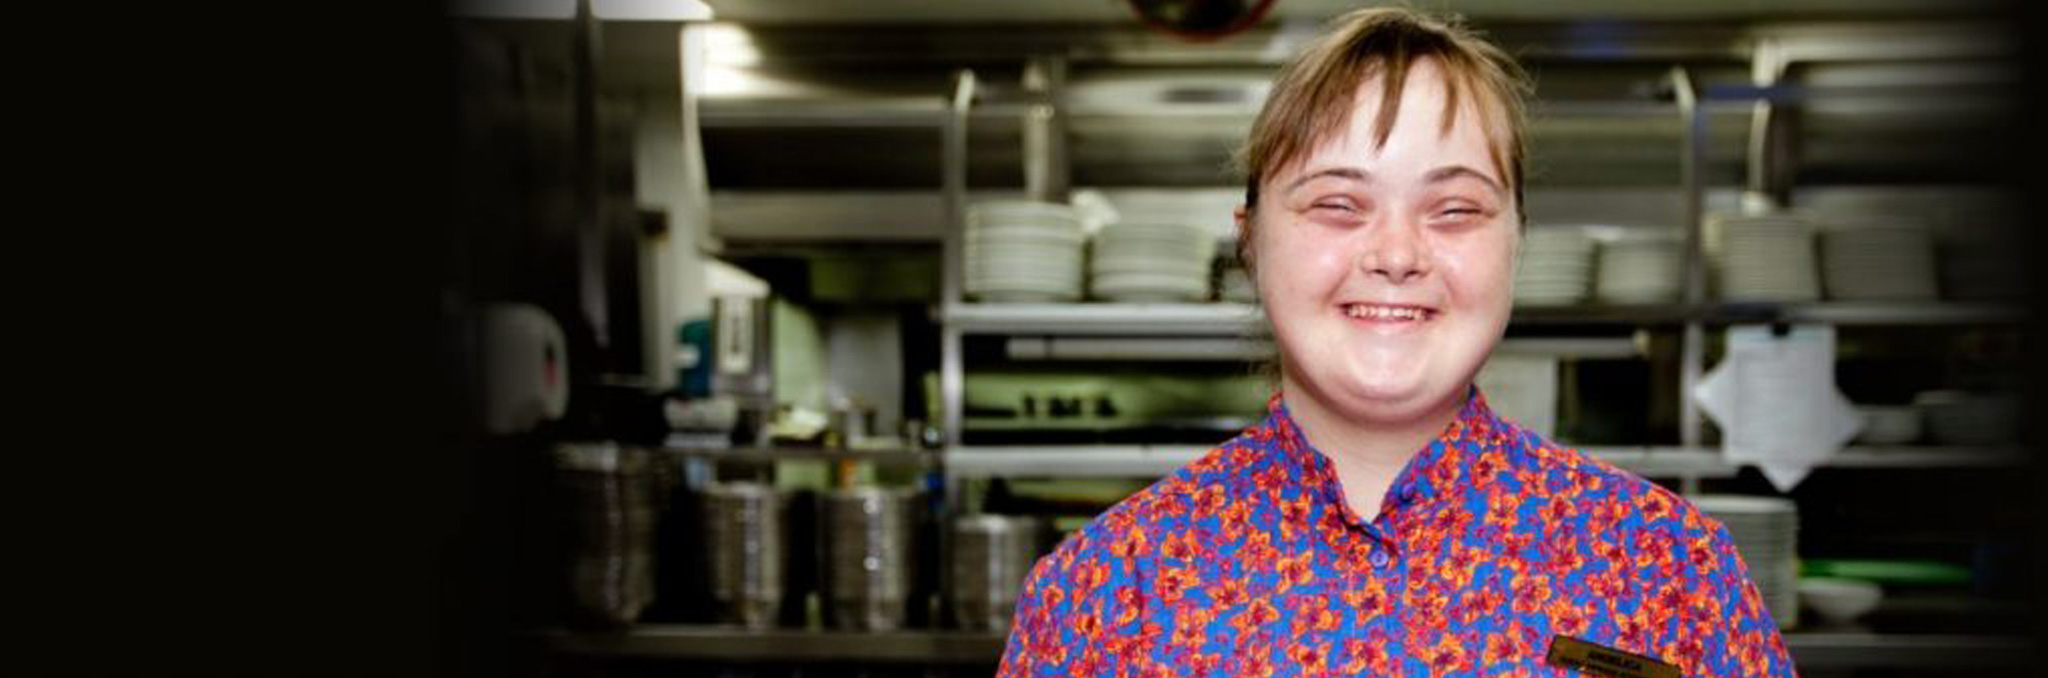 Young woman with Downs syndrome smiling in commercial kitchen